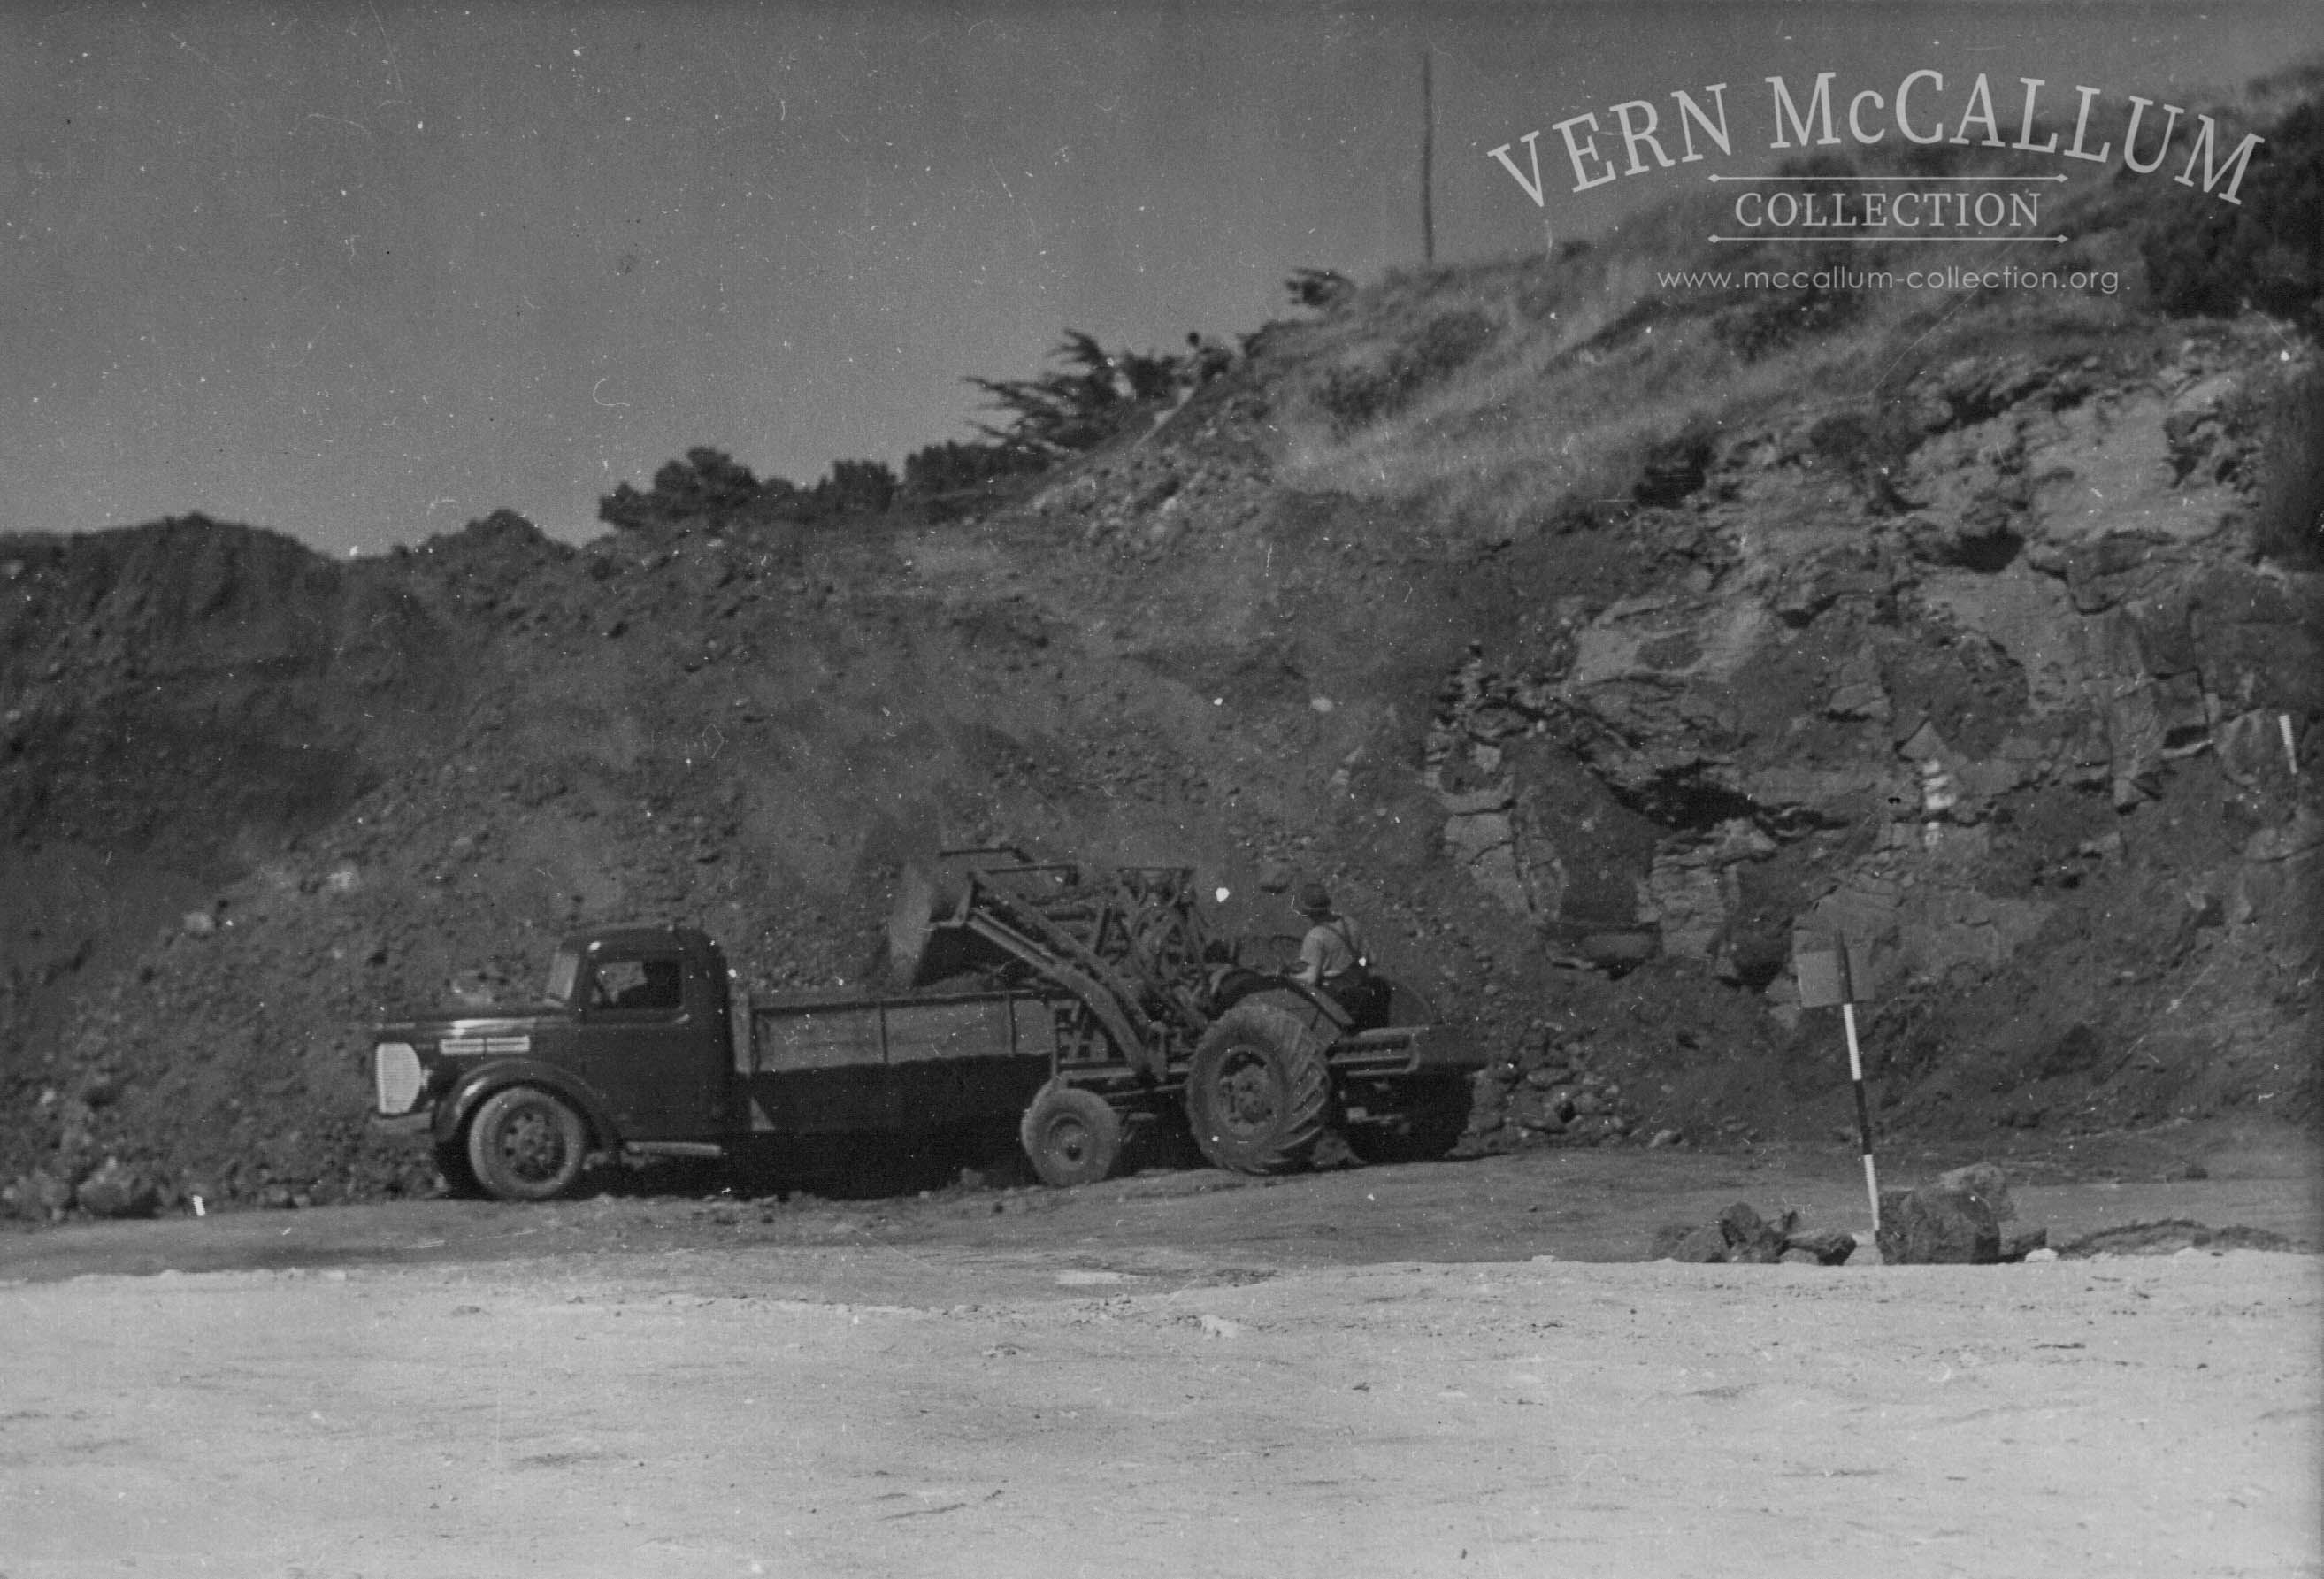 Loading of truck. Portland port area. George Wallace on the loader, a Fordson Detroit pre 1928 Moore cable loader.